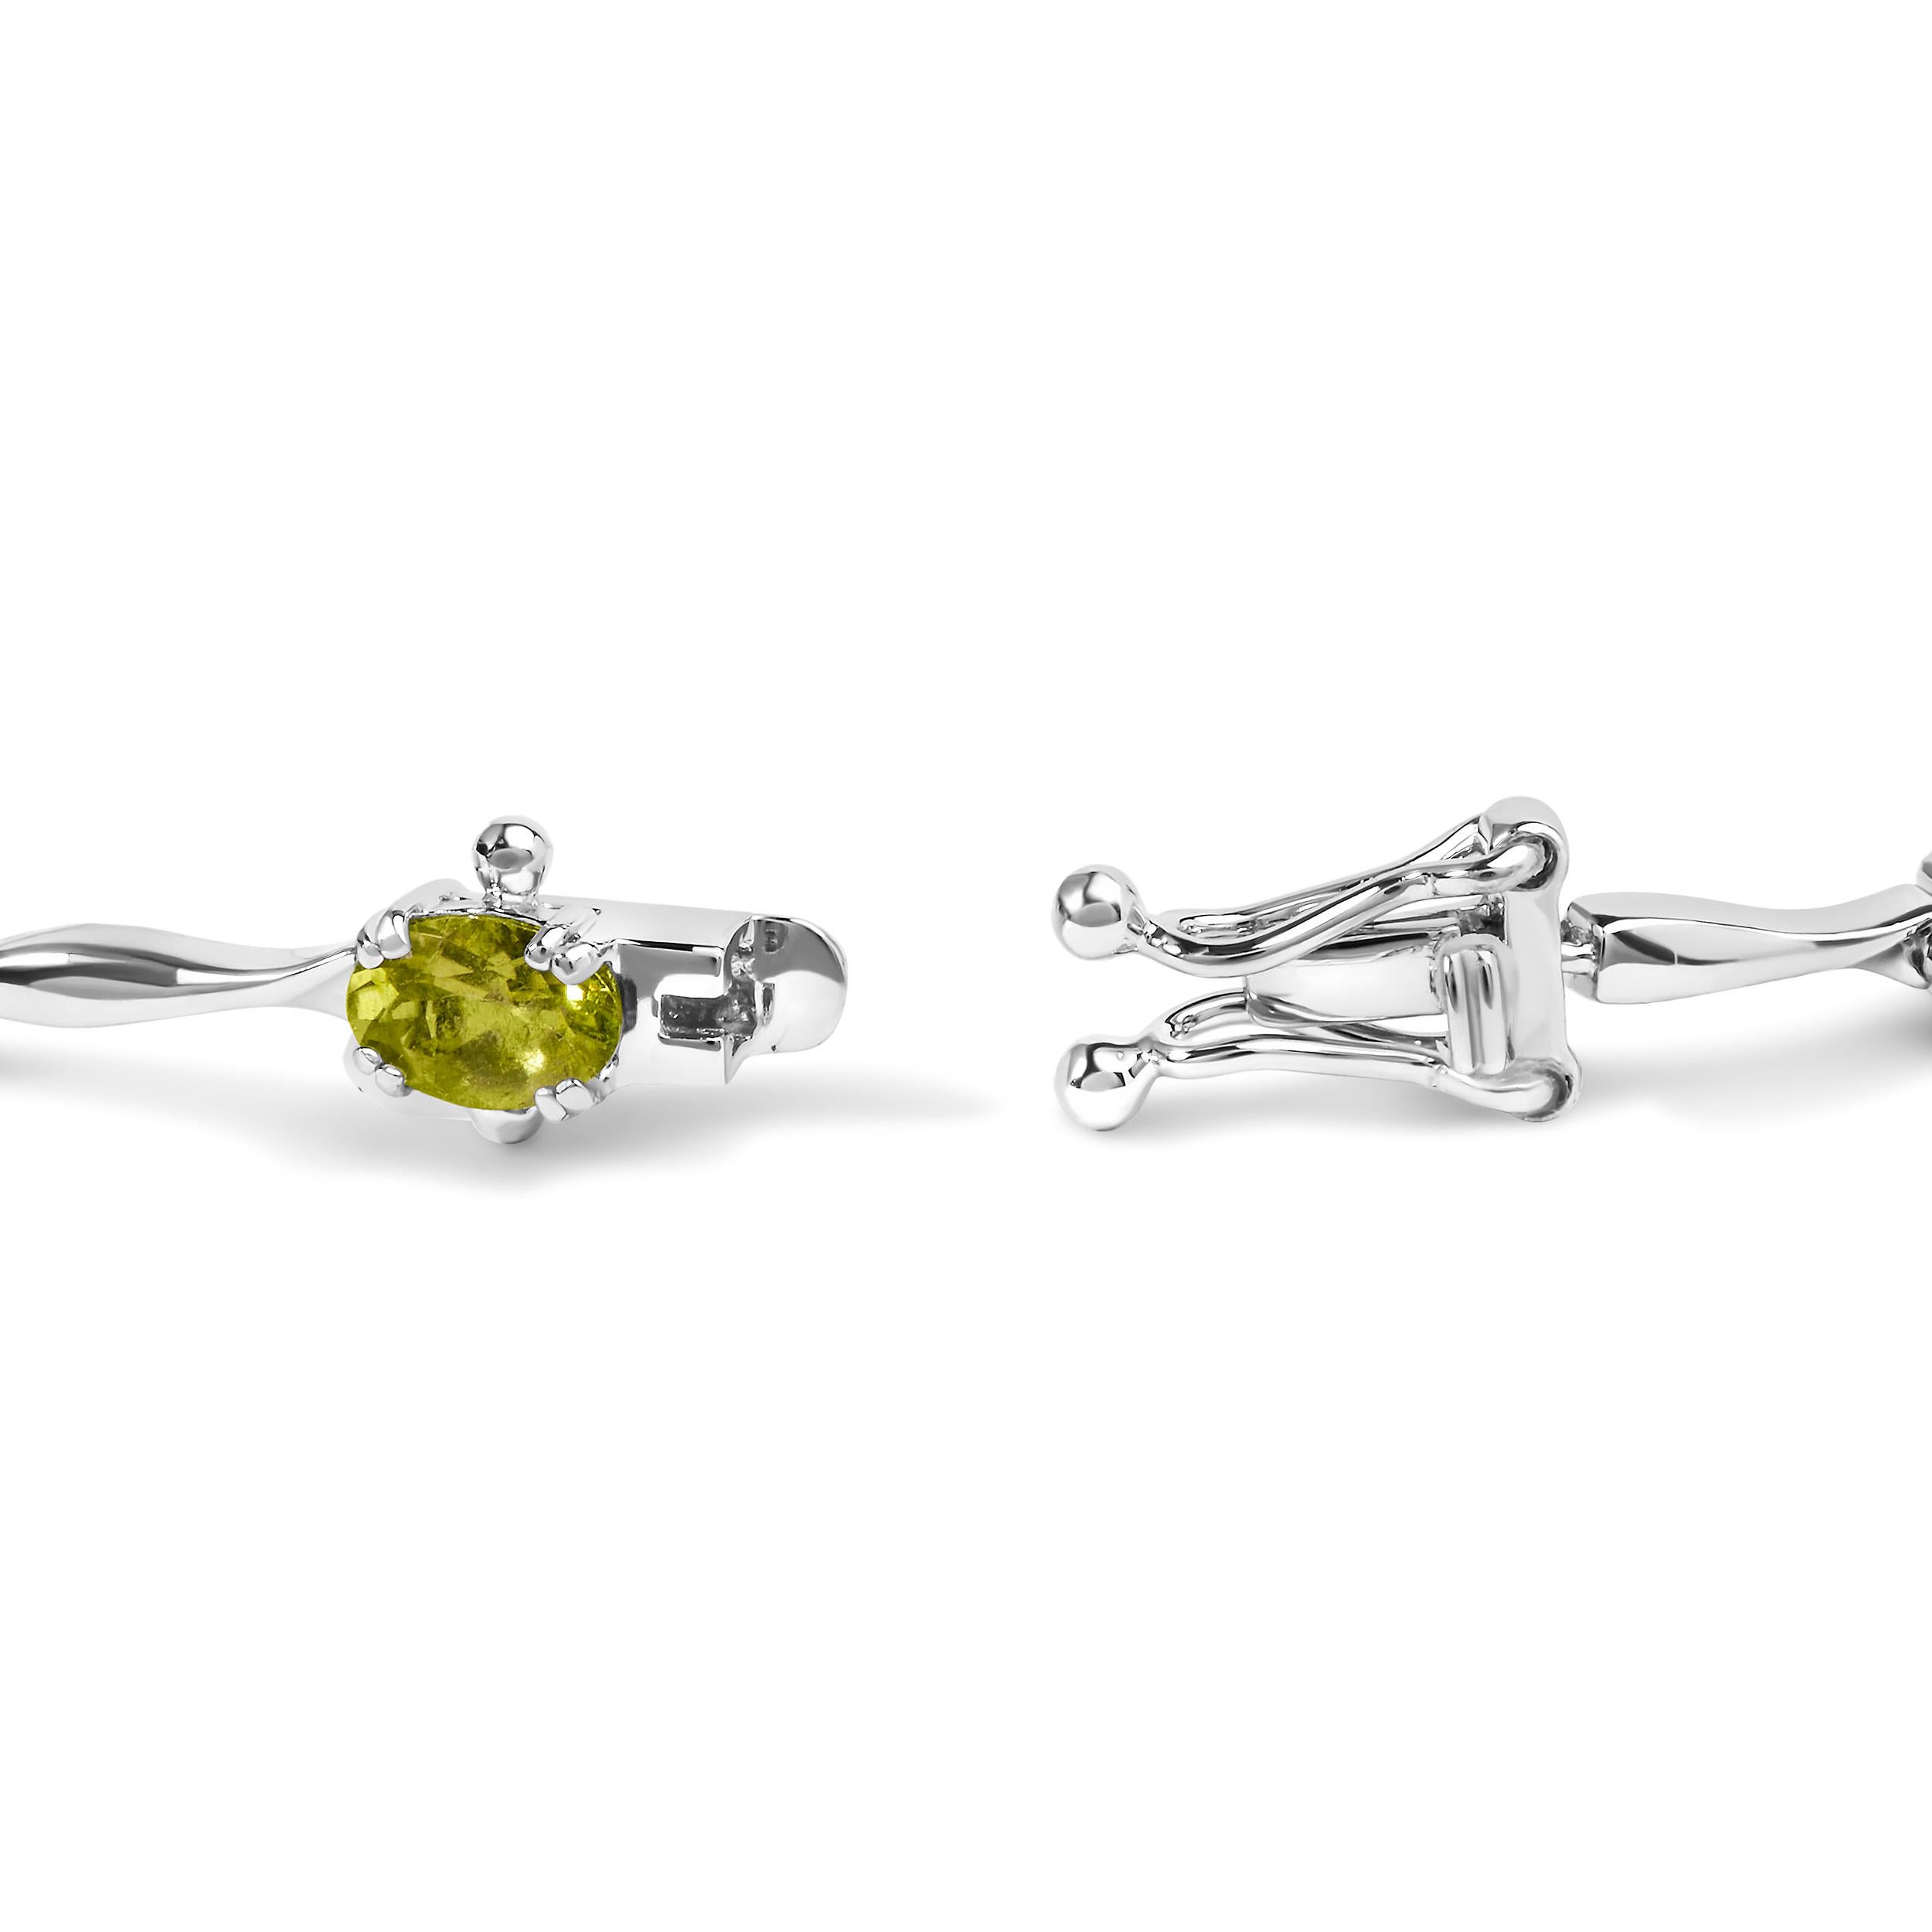 Indulge in the enchanting allure of this exquisite Green Peridot Link Bracelet. Crafted with utmost precision from .925 Sterling Silver, this captivating piece is designed to elevate your style to new heights. The oval-shaped, lab-created Peridot